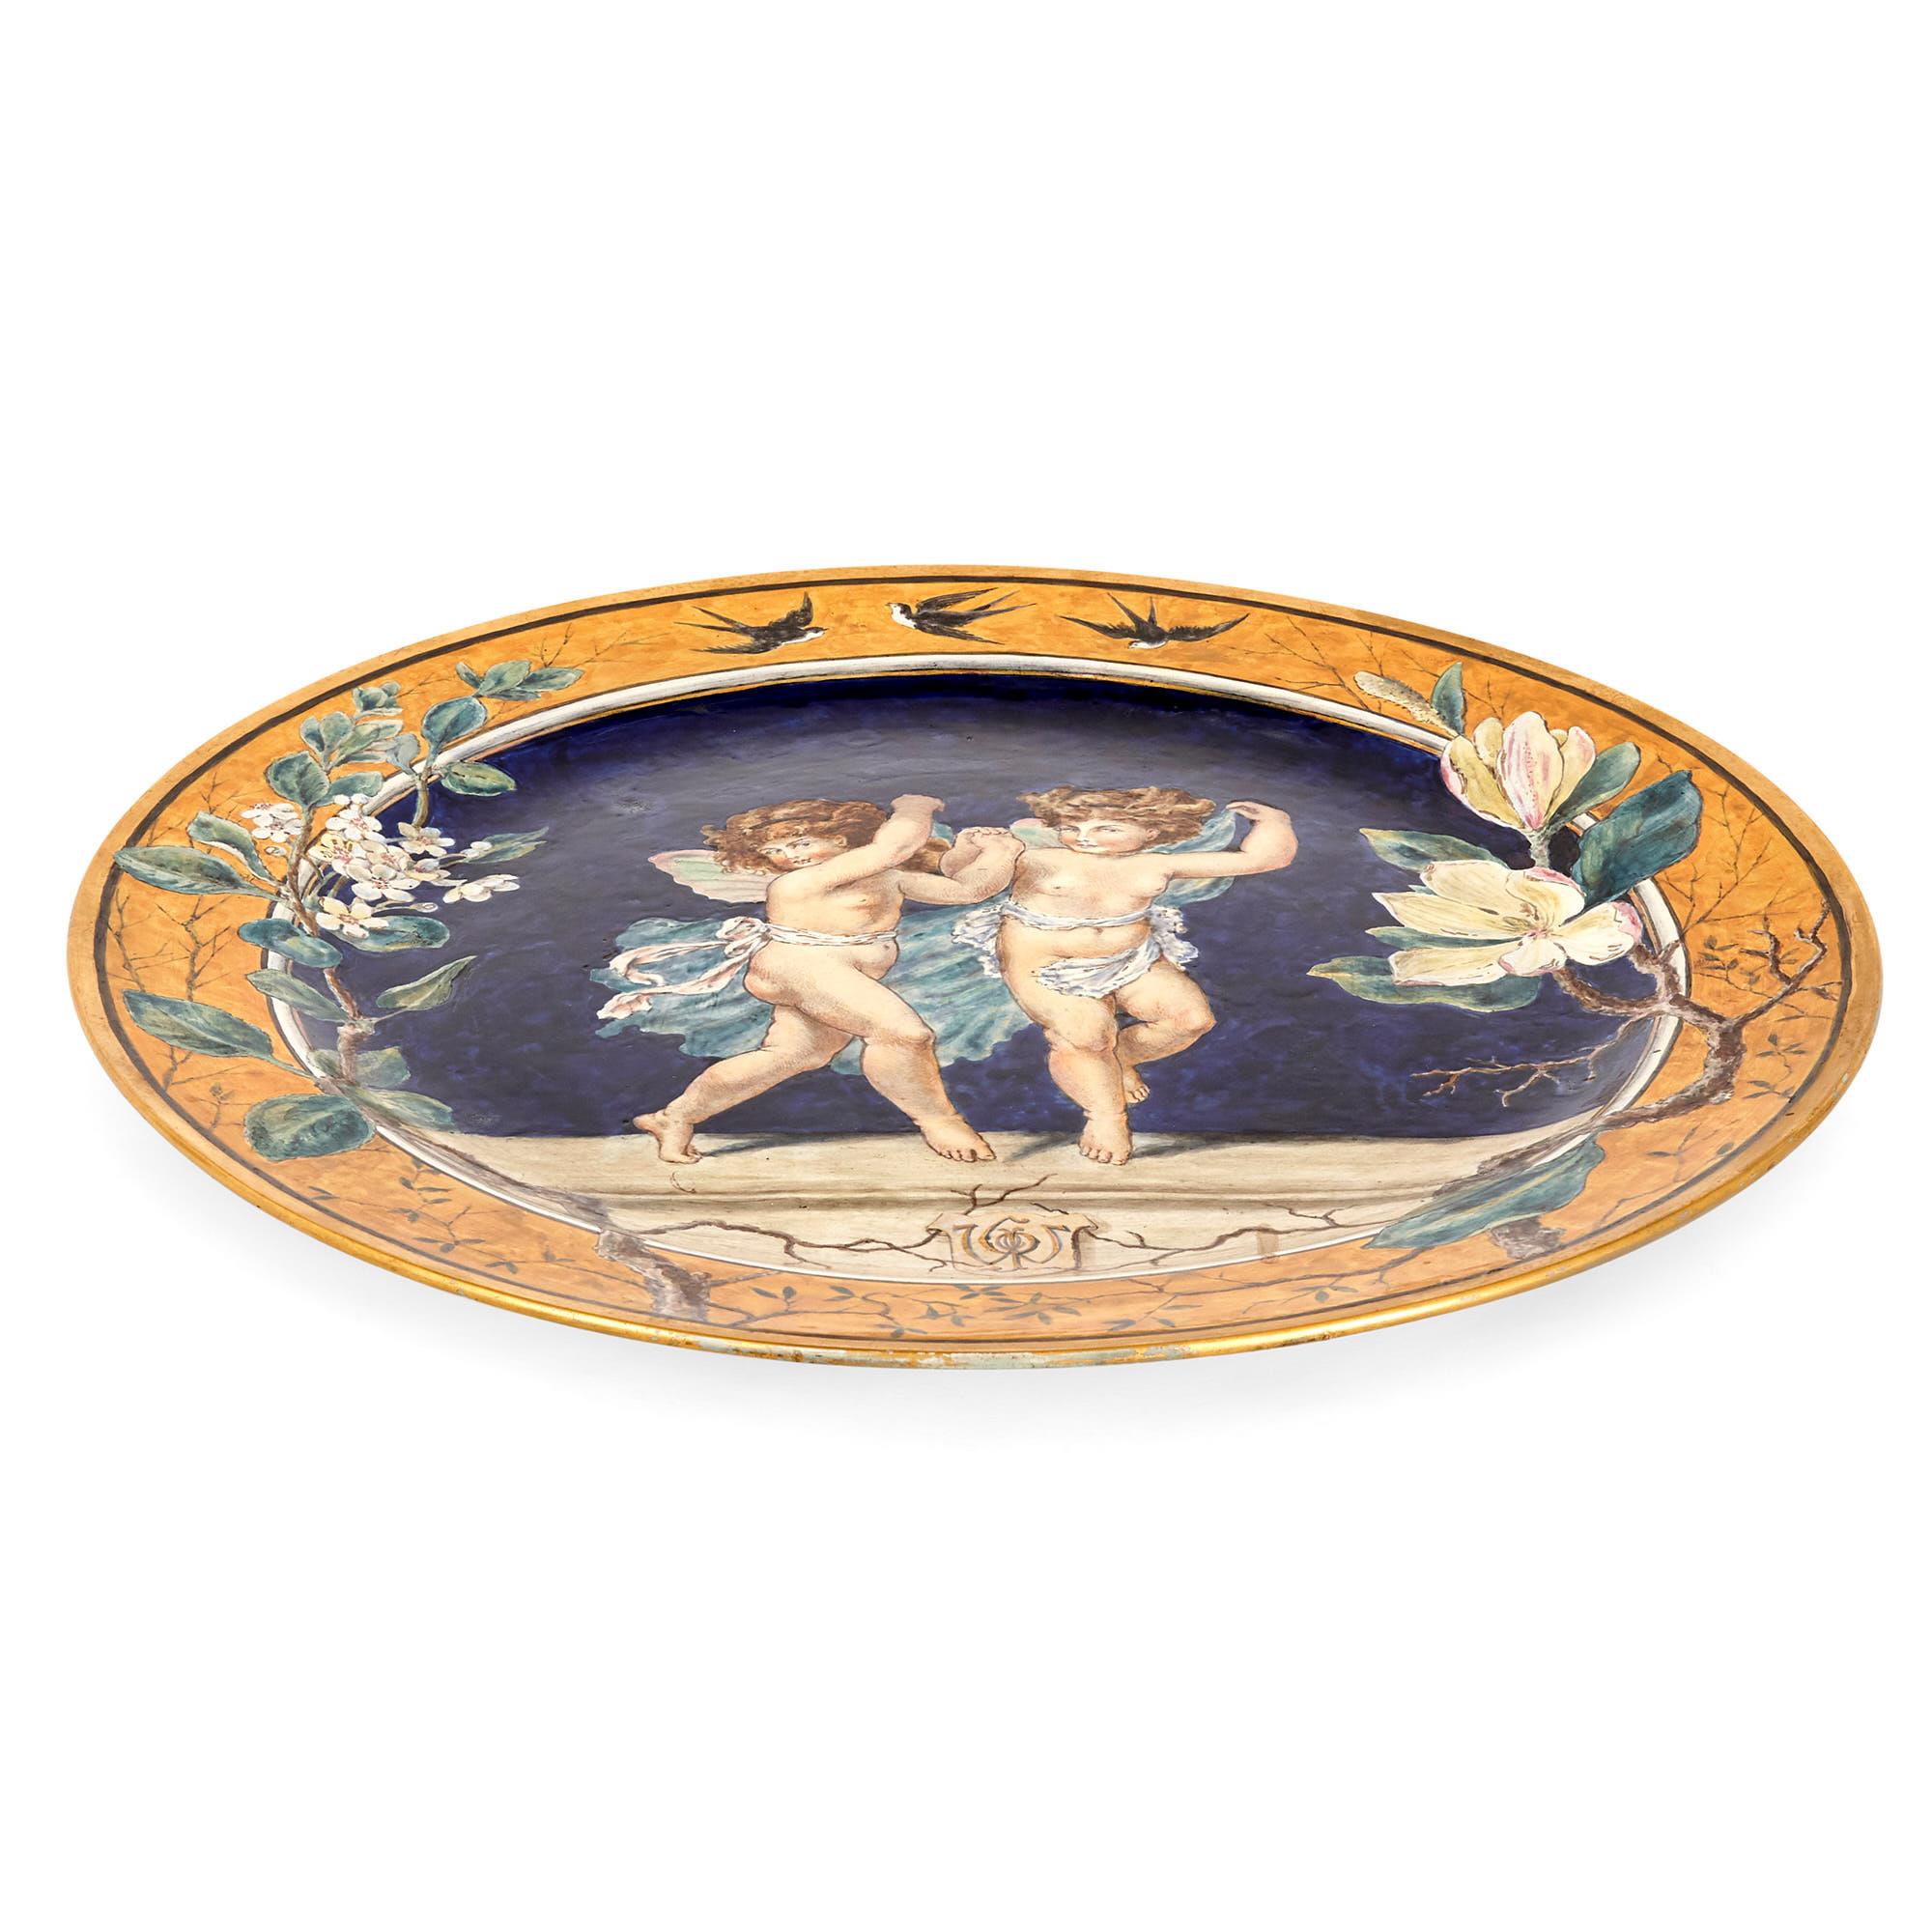 This beautiful large plate, its diameter is over 50 cm, was created by the English firm Minton and is crafted from tin-glazed ceramic, also known as Majolica. The surface of the plate is decorated with two cherubim set against a rich blue backdrop.